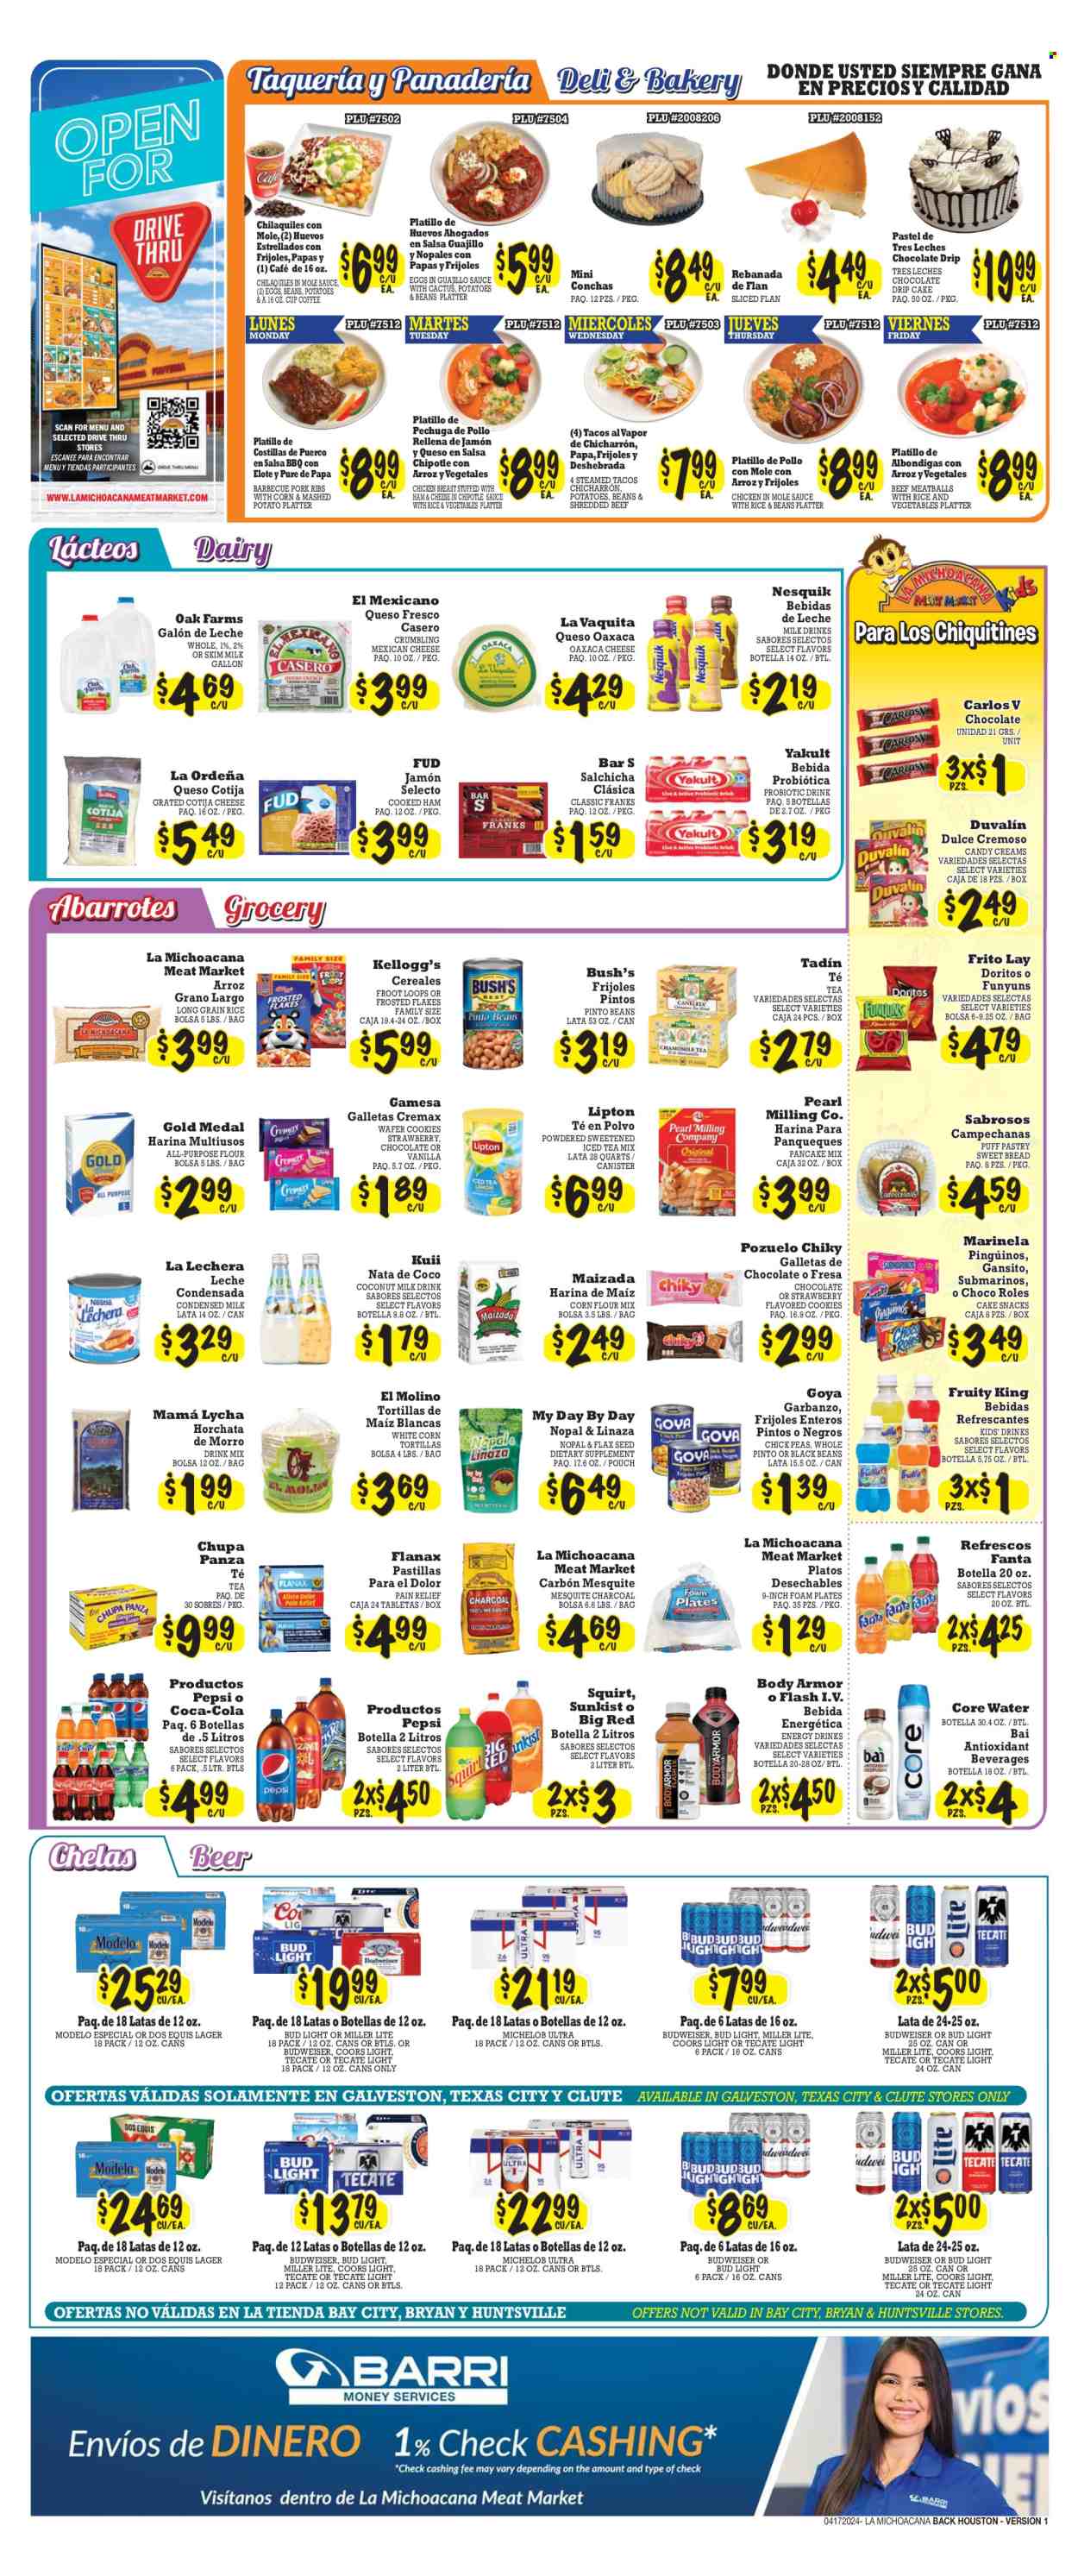 thumbnail - La Michoacana Meat Market Flyer - 04/17/2024 - 04/30/2024 - Sales products - corn tortillas, tortillas, tacos, sweet bread, pancake mix, potatoes, meatballs, snack, ham, chicken breasts, frankfurters, queso fresco, cheese, Nesquik, flavoured milk, condensed milk, probiotic drink, plant-based milk, cookies, wafers, Kellogg's, Candy, Doritos, salty snack, all purpose flour, corn flour, black beans, coconut milk, pinto beans, Goya, Frosted Flakes, rice, chickpeas, long grain rice, garbanzo beans, salsa, Coca-Cola, Pepsi, Fanta, Body Armor, energy drink, Lipton, ice tea, soft drink, Bai, electrolyte drink, antioxidant drink, water, carbonated soft drink, coffee, alcohol, beer, Budweiser, Bud Light, Lager, Modelo, chicken, pork meat, pork ribs, canister, plate, platters, foam plates, Miller Lite, Coors, Dos Equis, Michelob. Page 2.